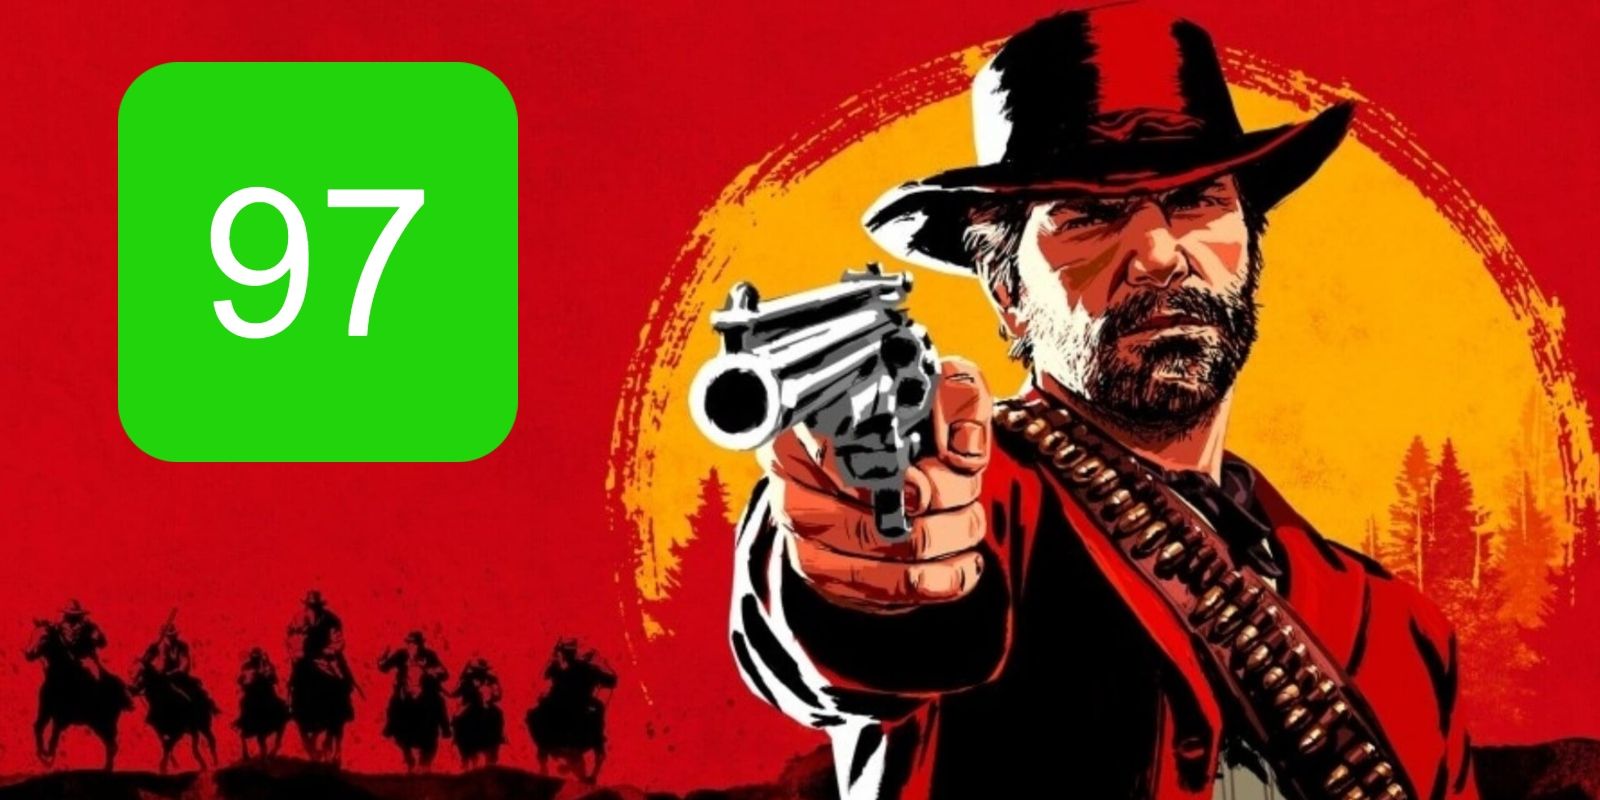 The metascore for Red Dead 2 featuring a promotional poster for the game